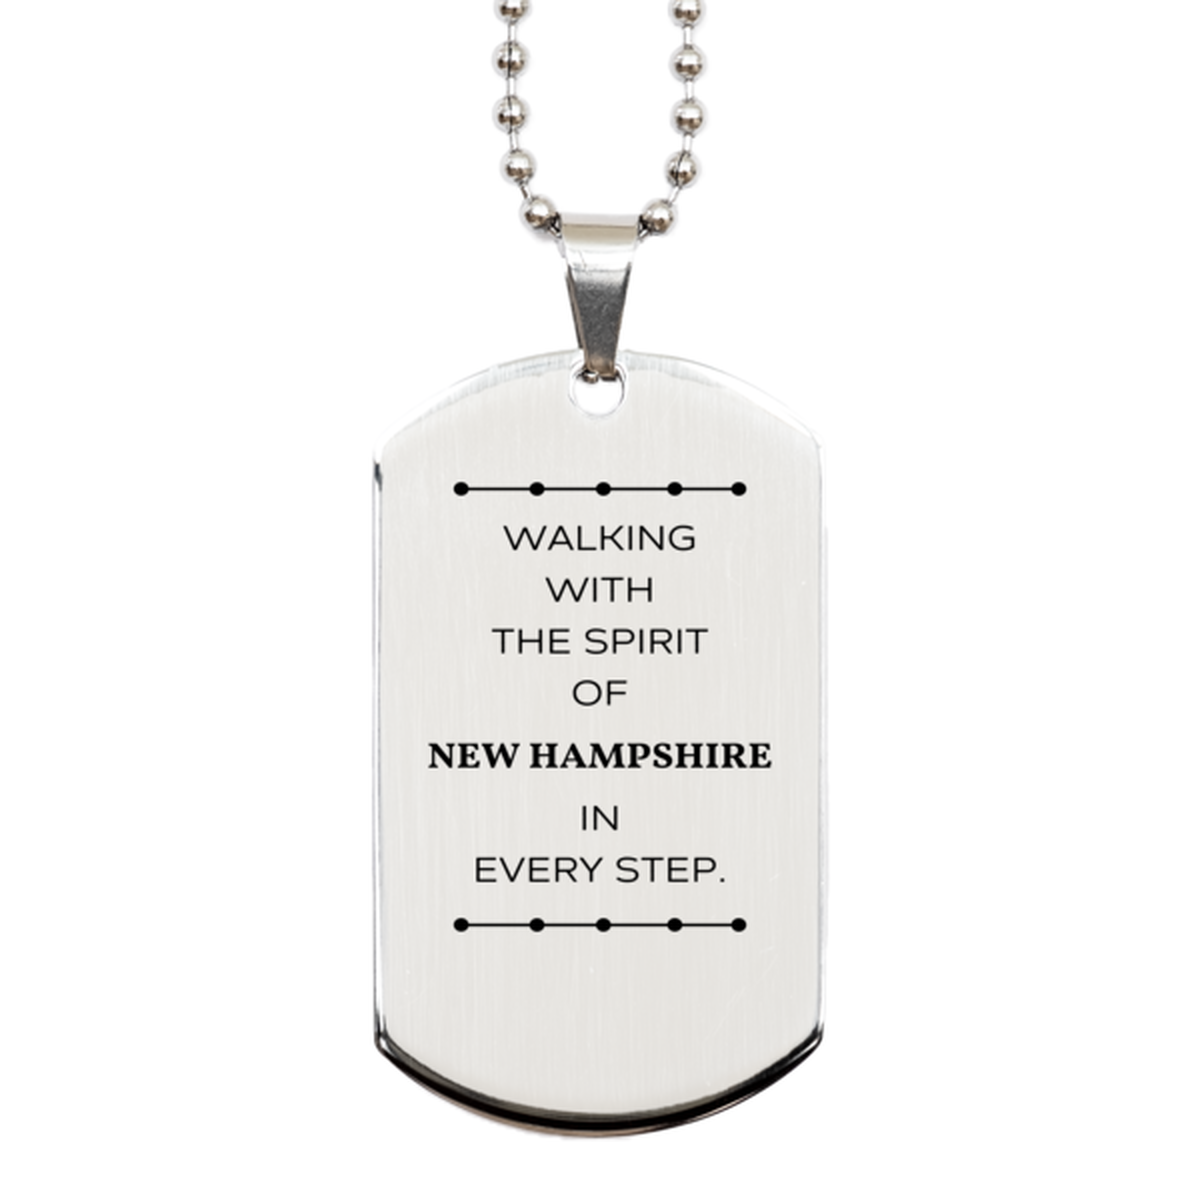 New Hampshire Gifts, Walking with the spirit, Love New Hampshire Birthday Christmas Silver Dog Tag For New Hampshire People, Men, Women, Friends